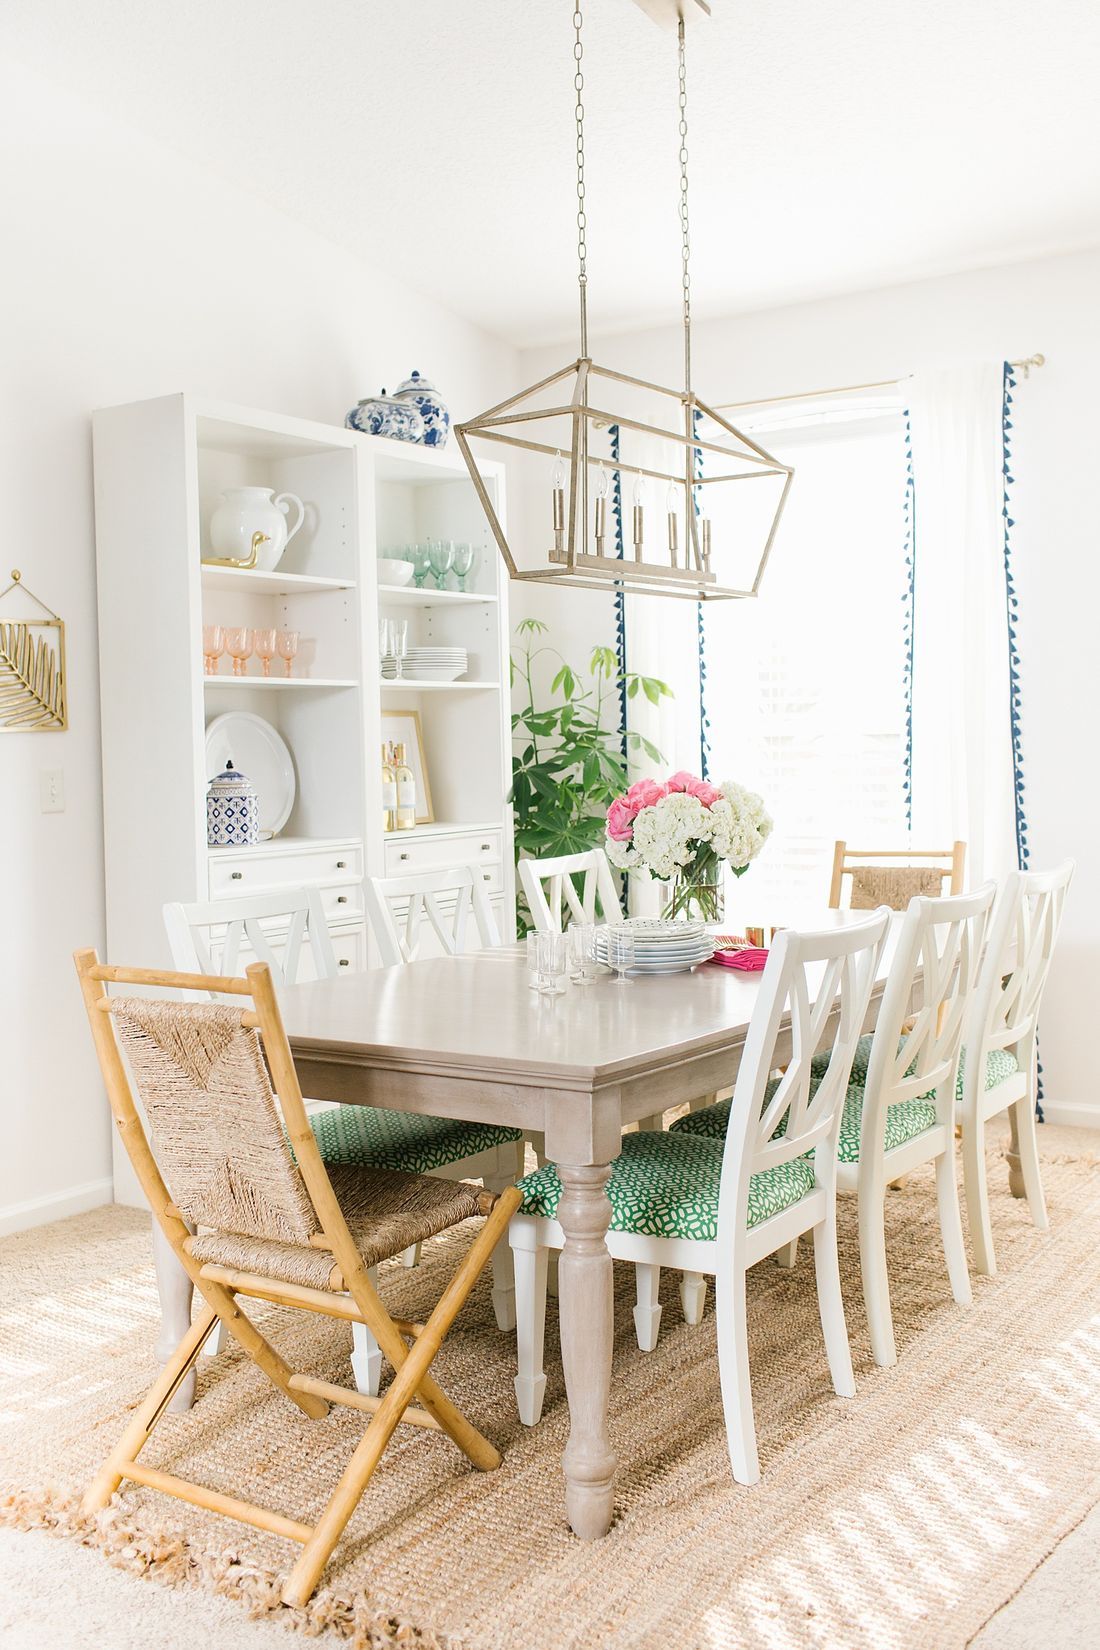 17 Most Inspiring Coastal Dining Rooms, Coastal Dining Room Tables And Chairs